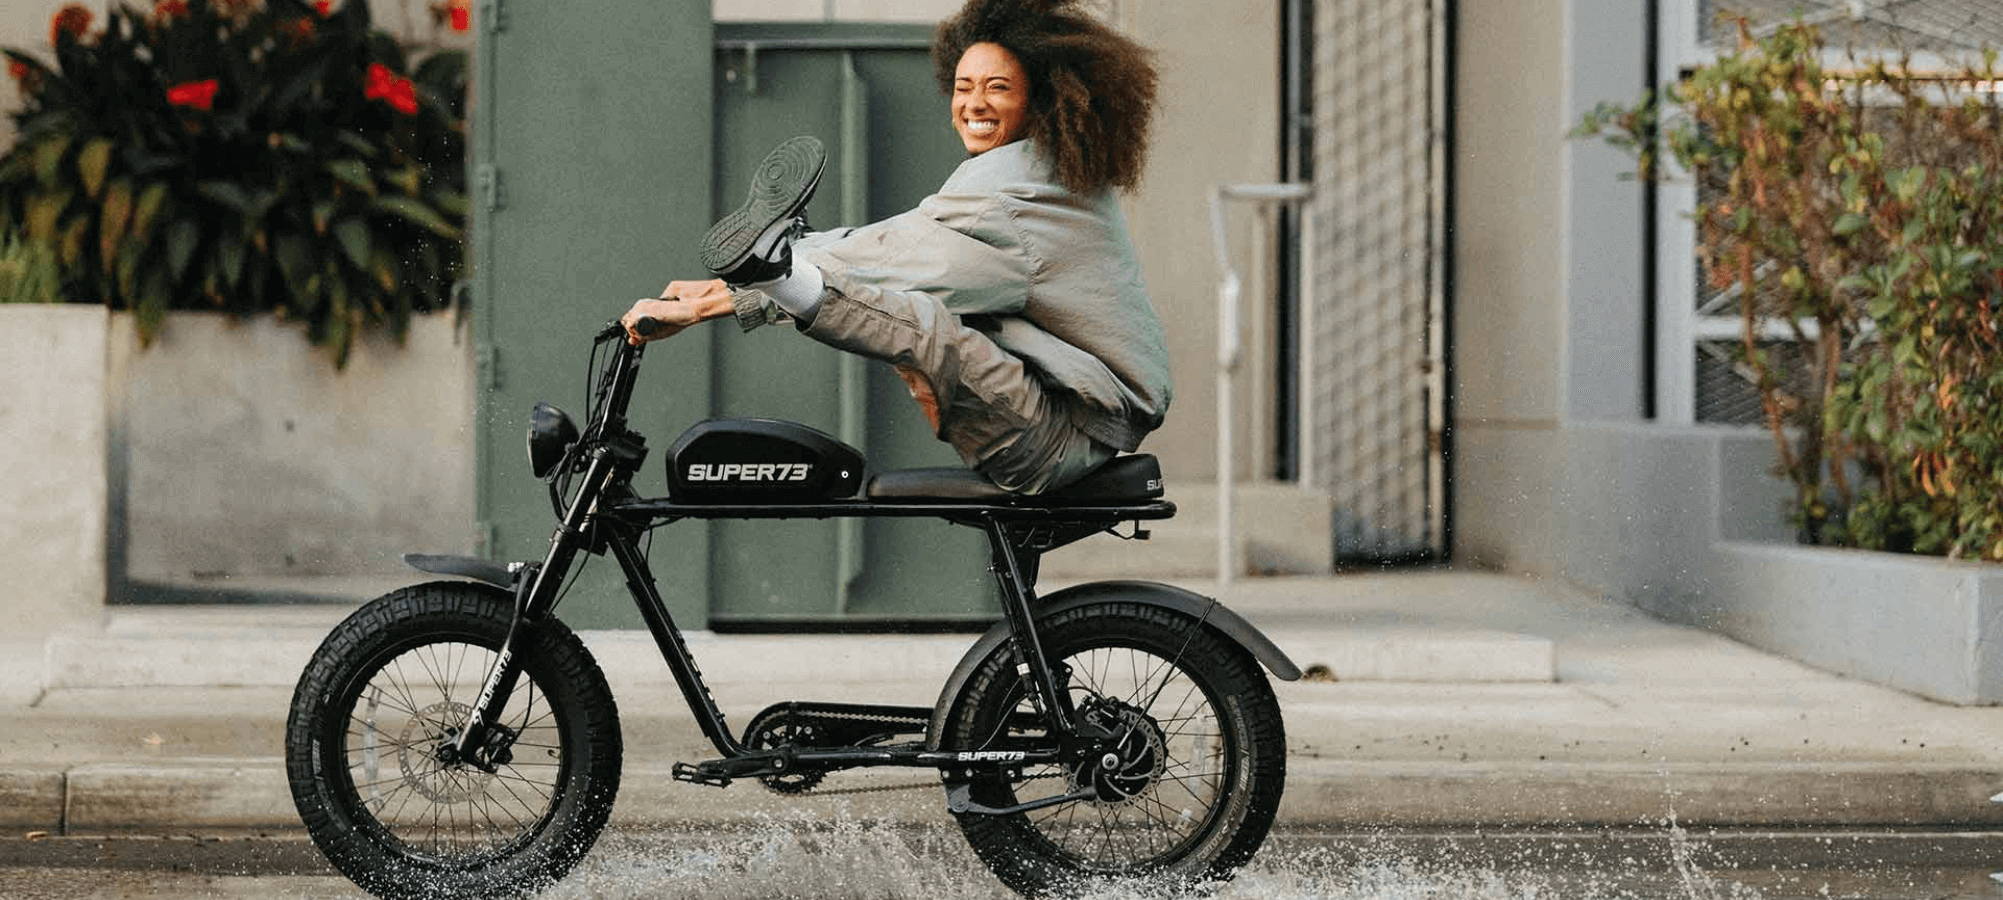 black electric bike with a black power hair girl riding and having fun